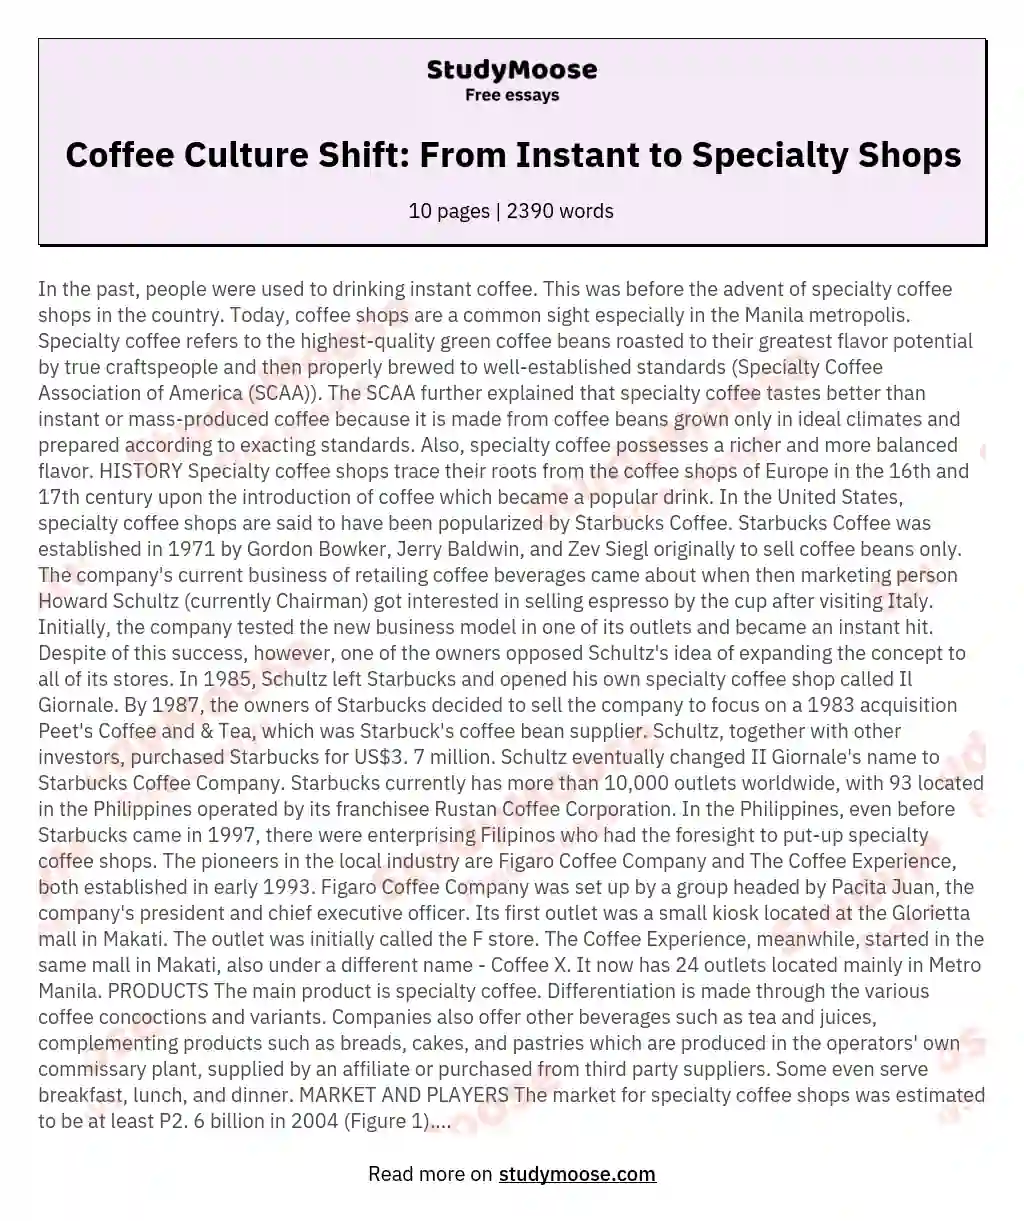 Coffee Culture Shift: From Instant to Specialty Shops essay